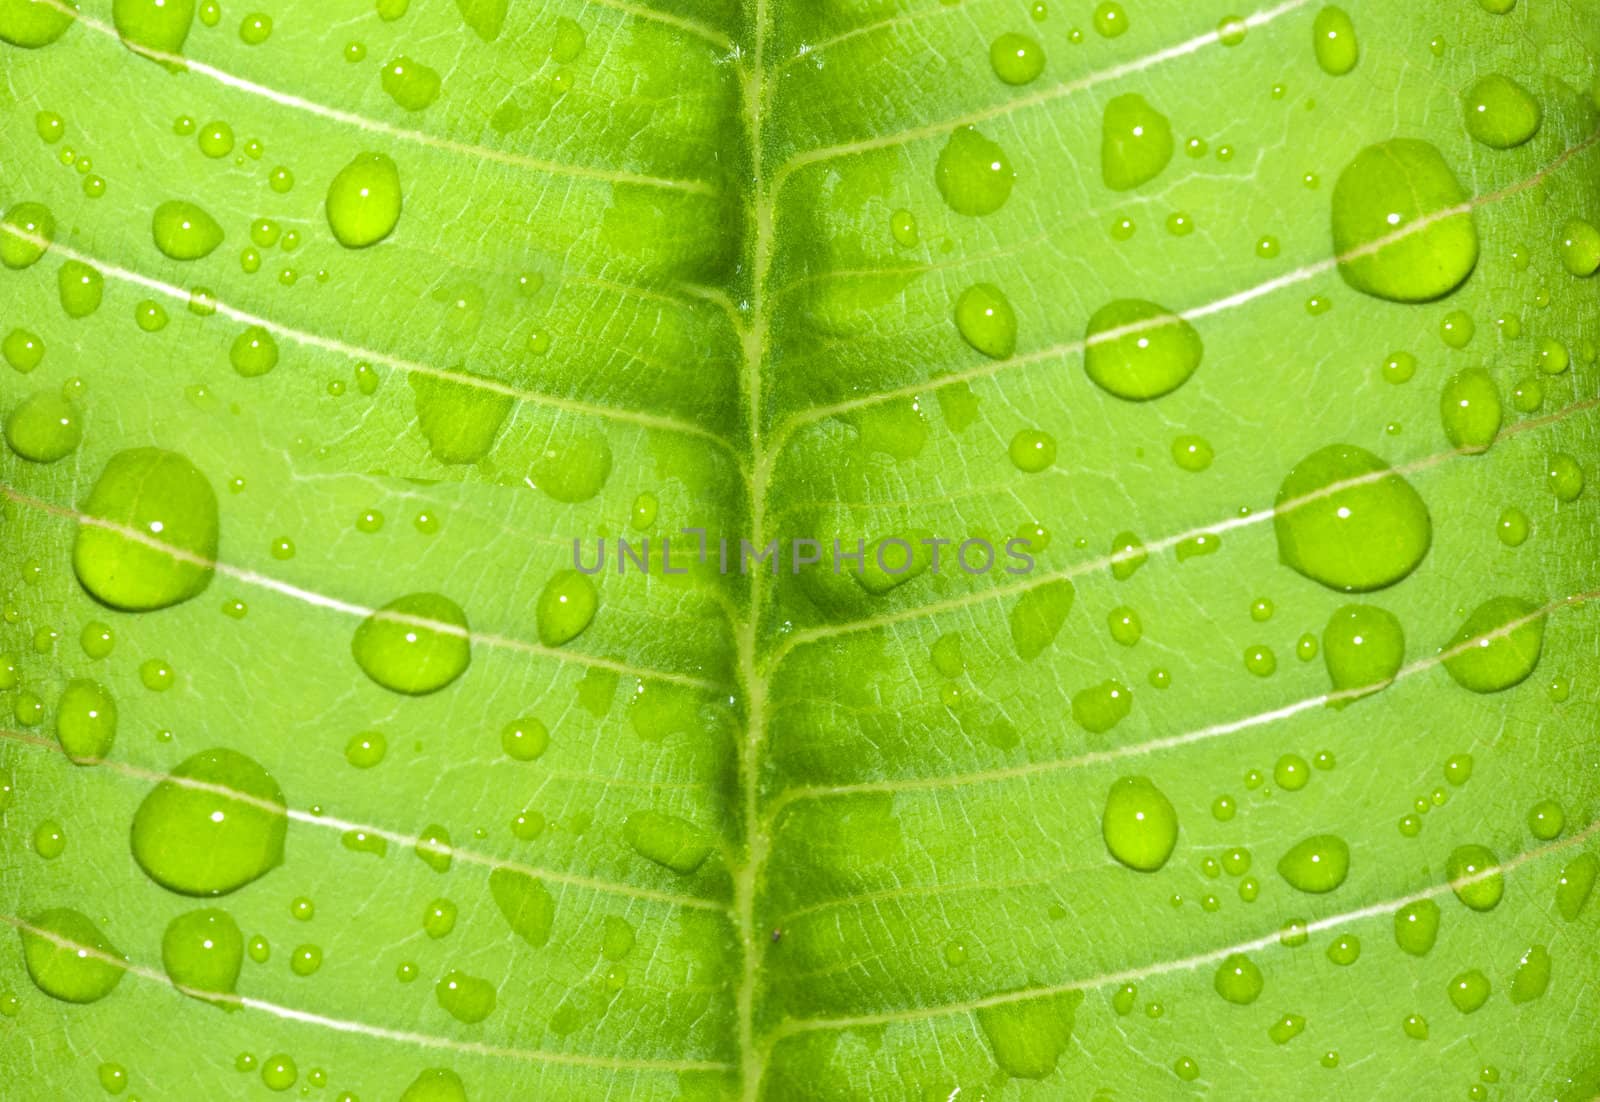 water-drop on a green leaf after rain by yuliang11